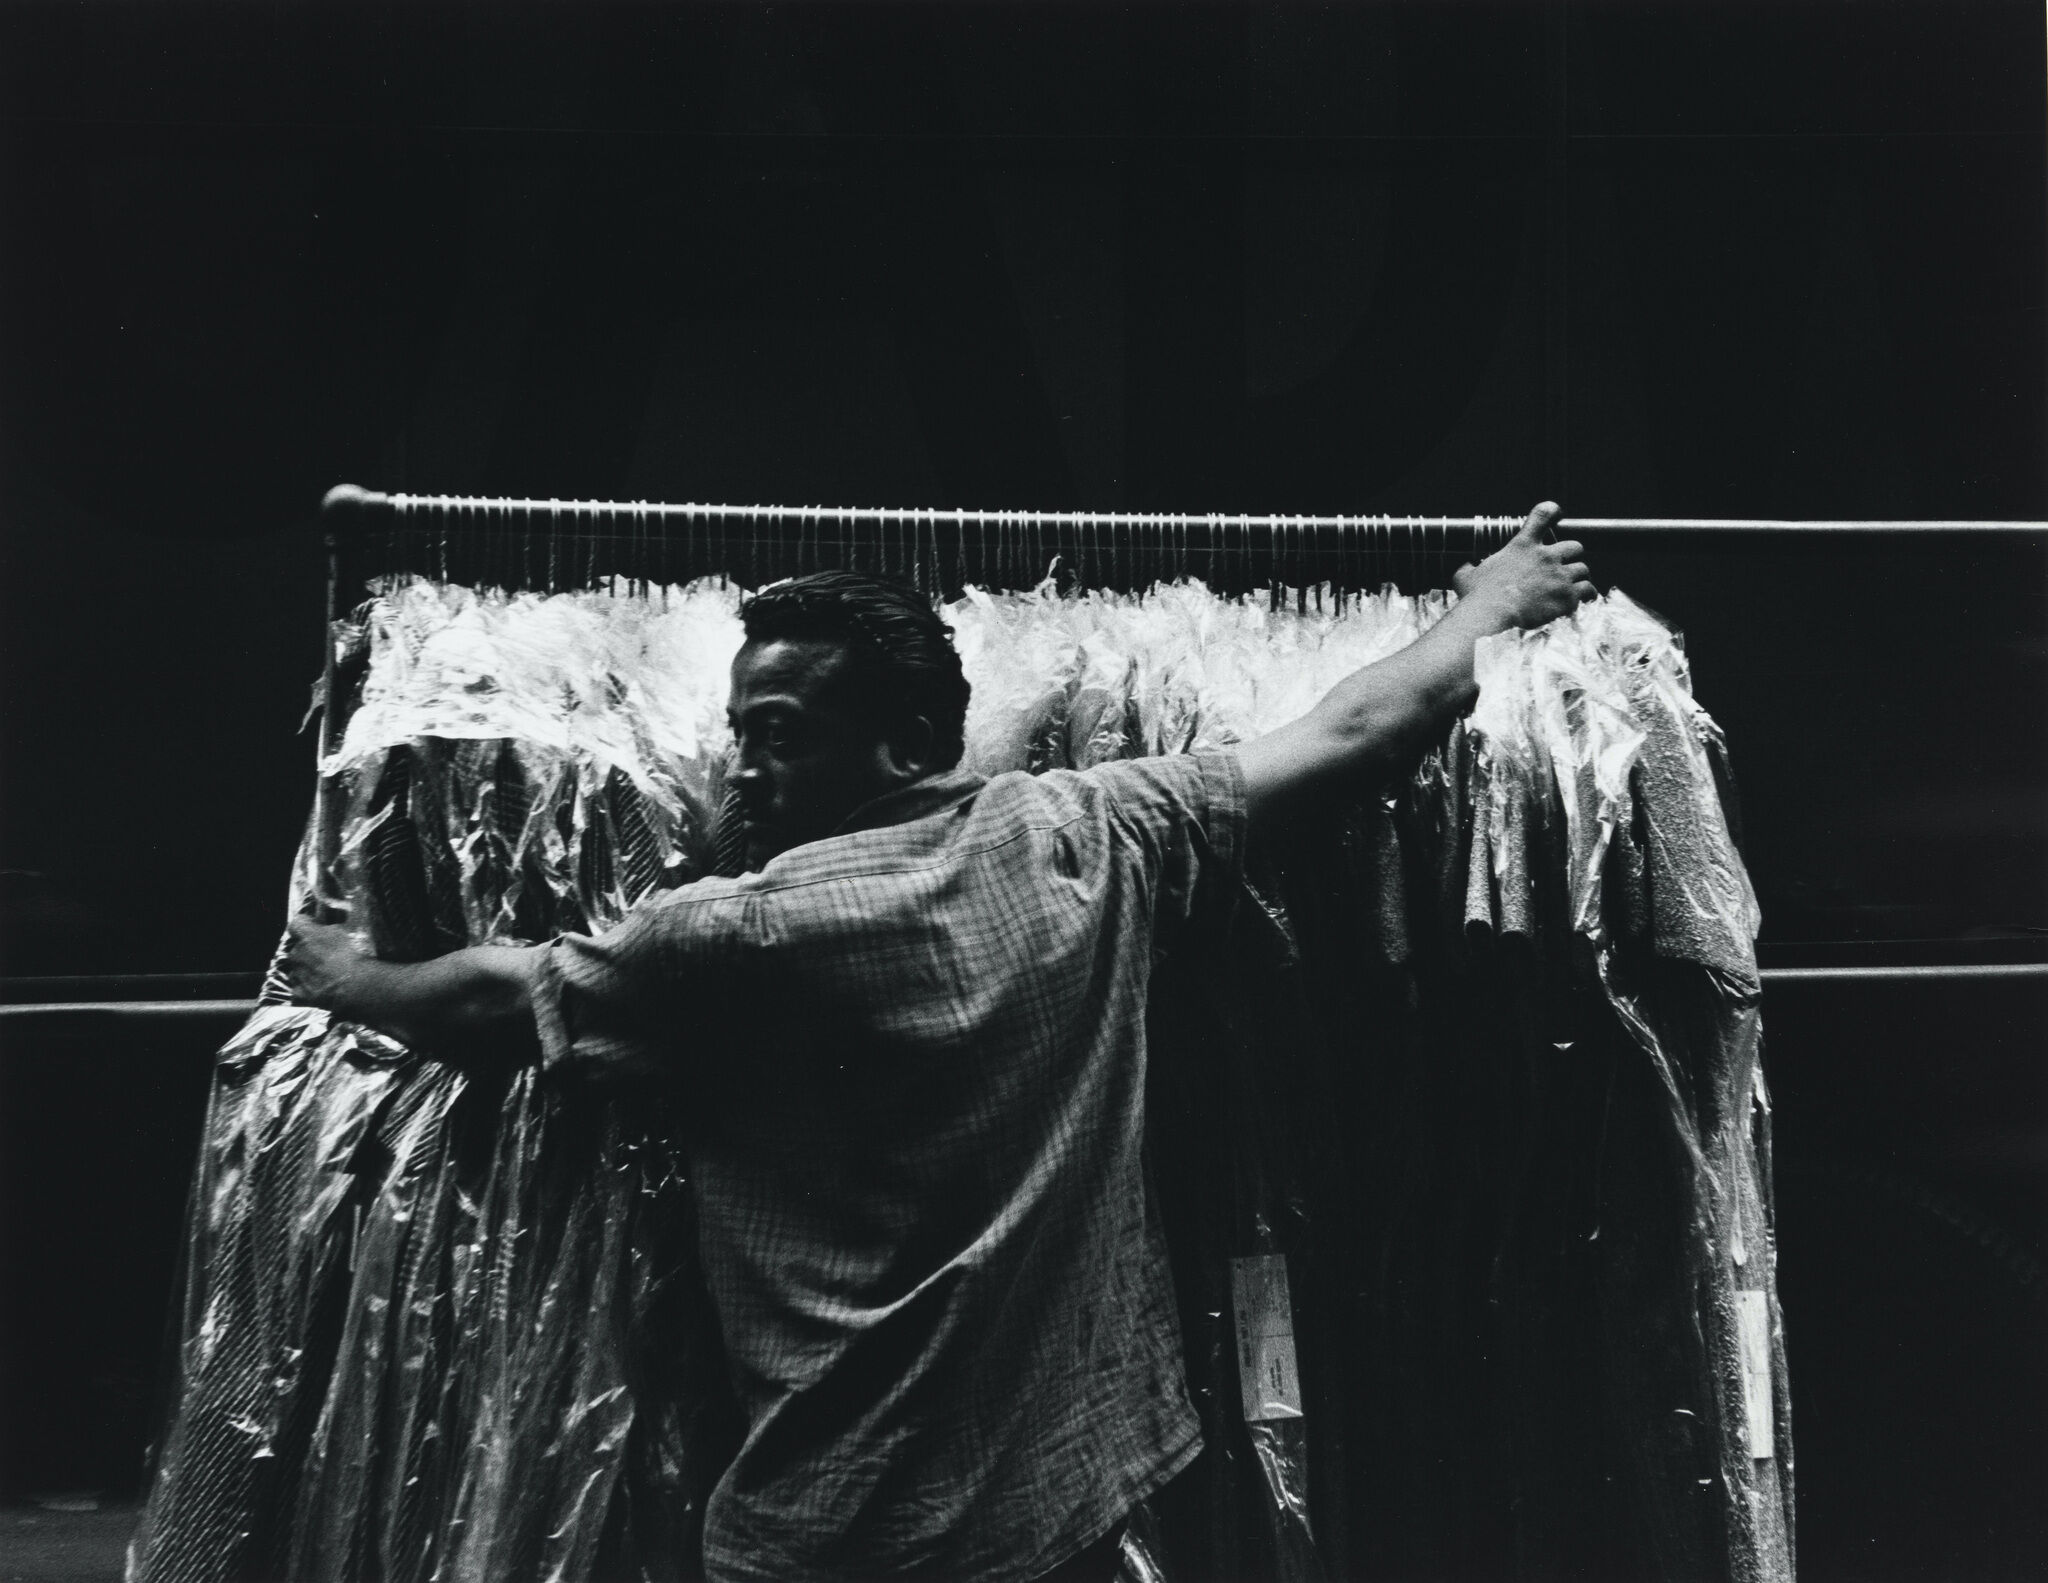 A man standing in front of a rolling rack of garments.